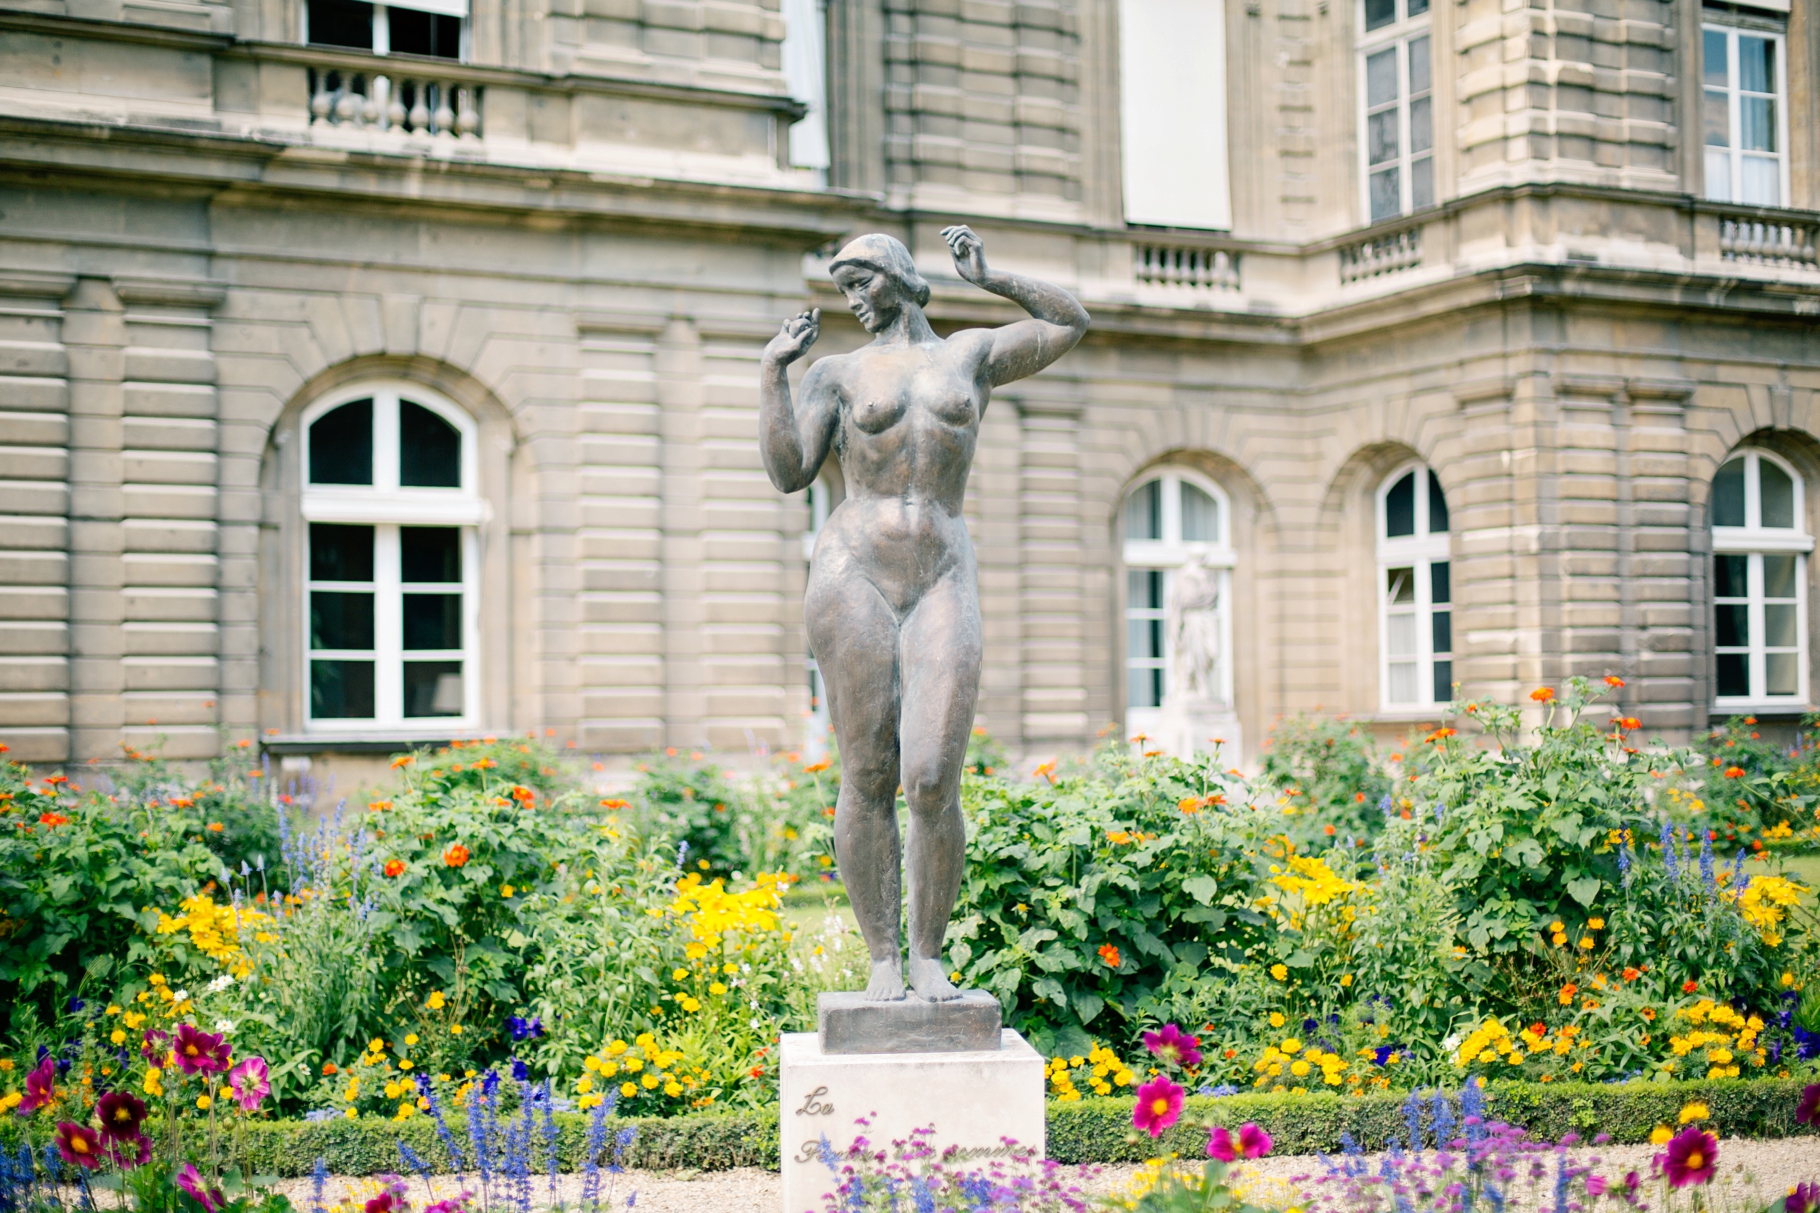 13-Jardin-du-Luxembourg-Paris-France-Europe-Trip-Photography-by-Betty-Elaine